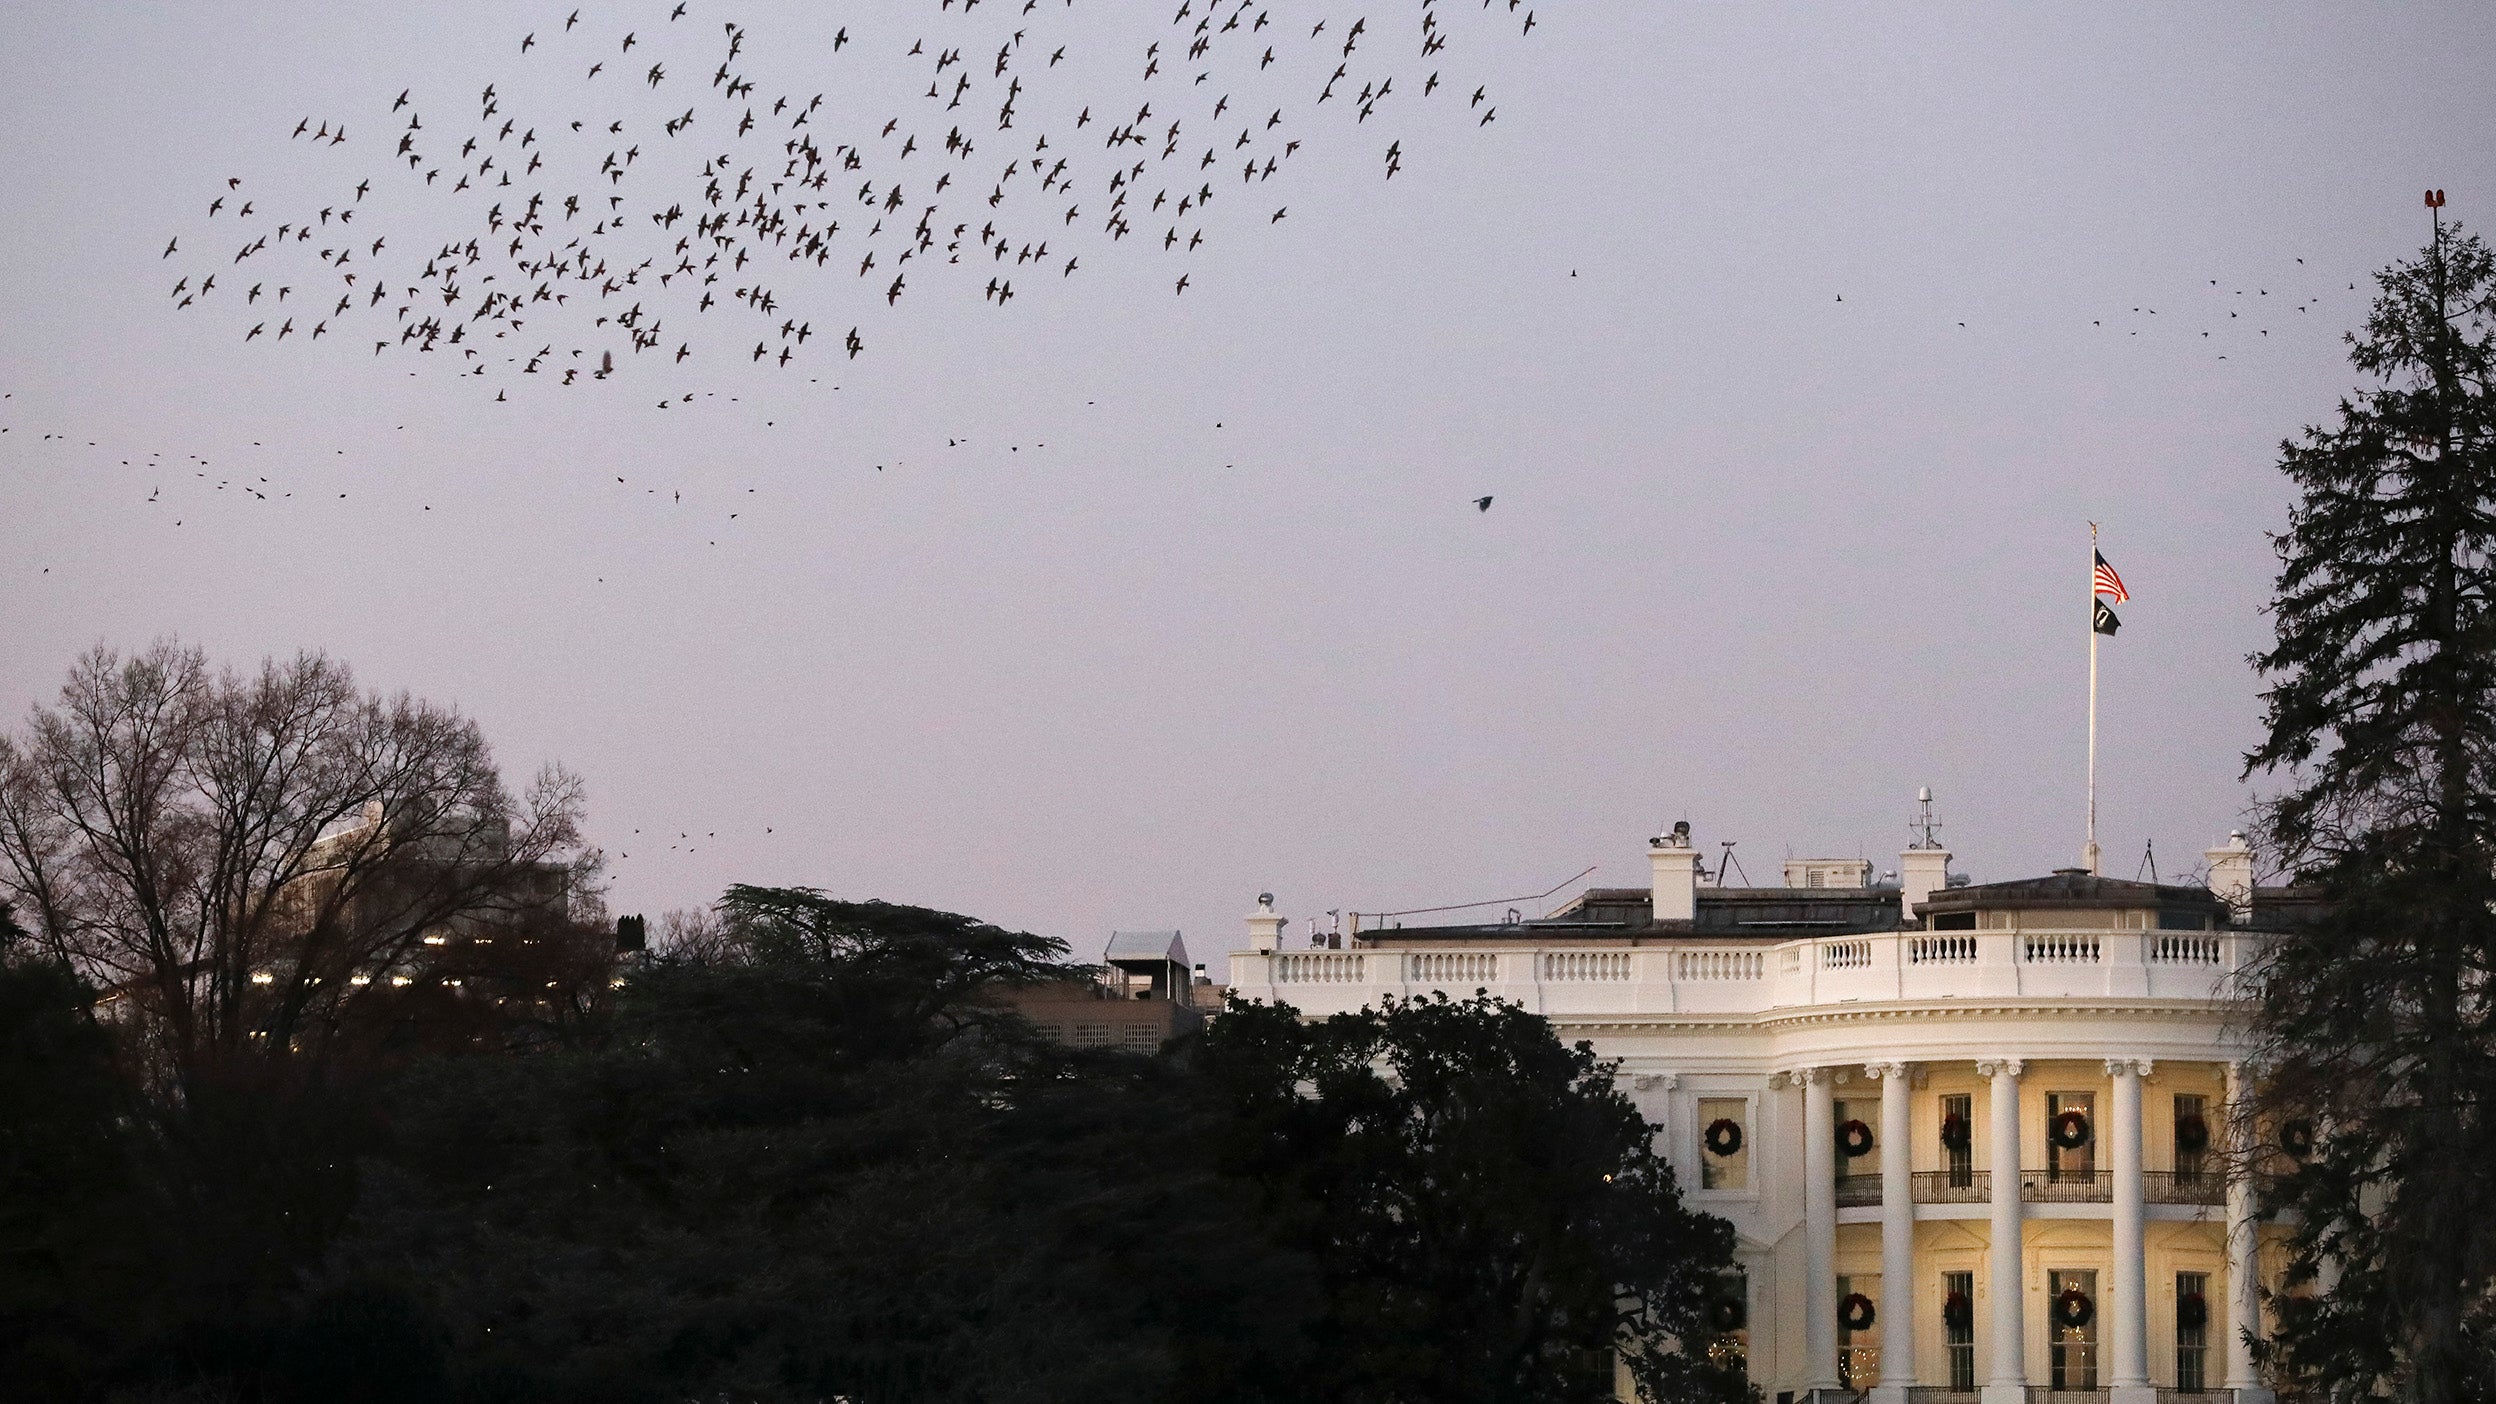 View of The White House, Washington D.C., with birds flying overhead